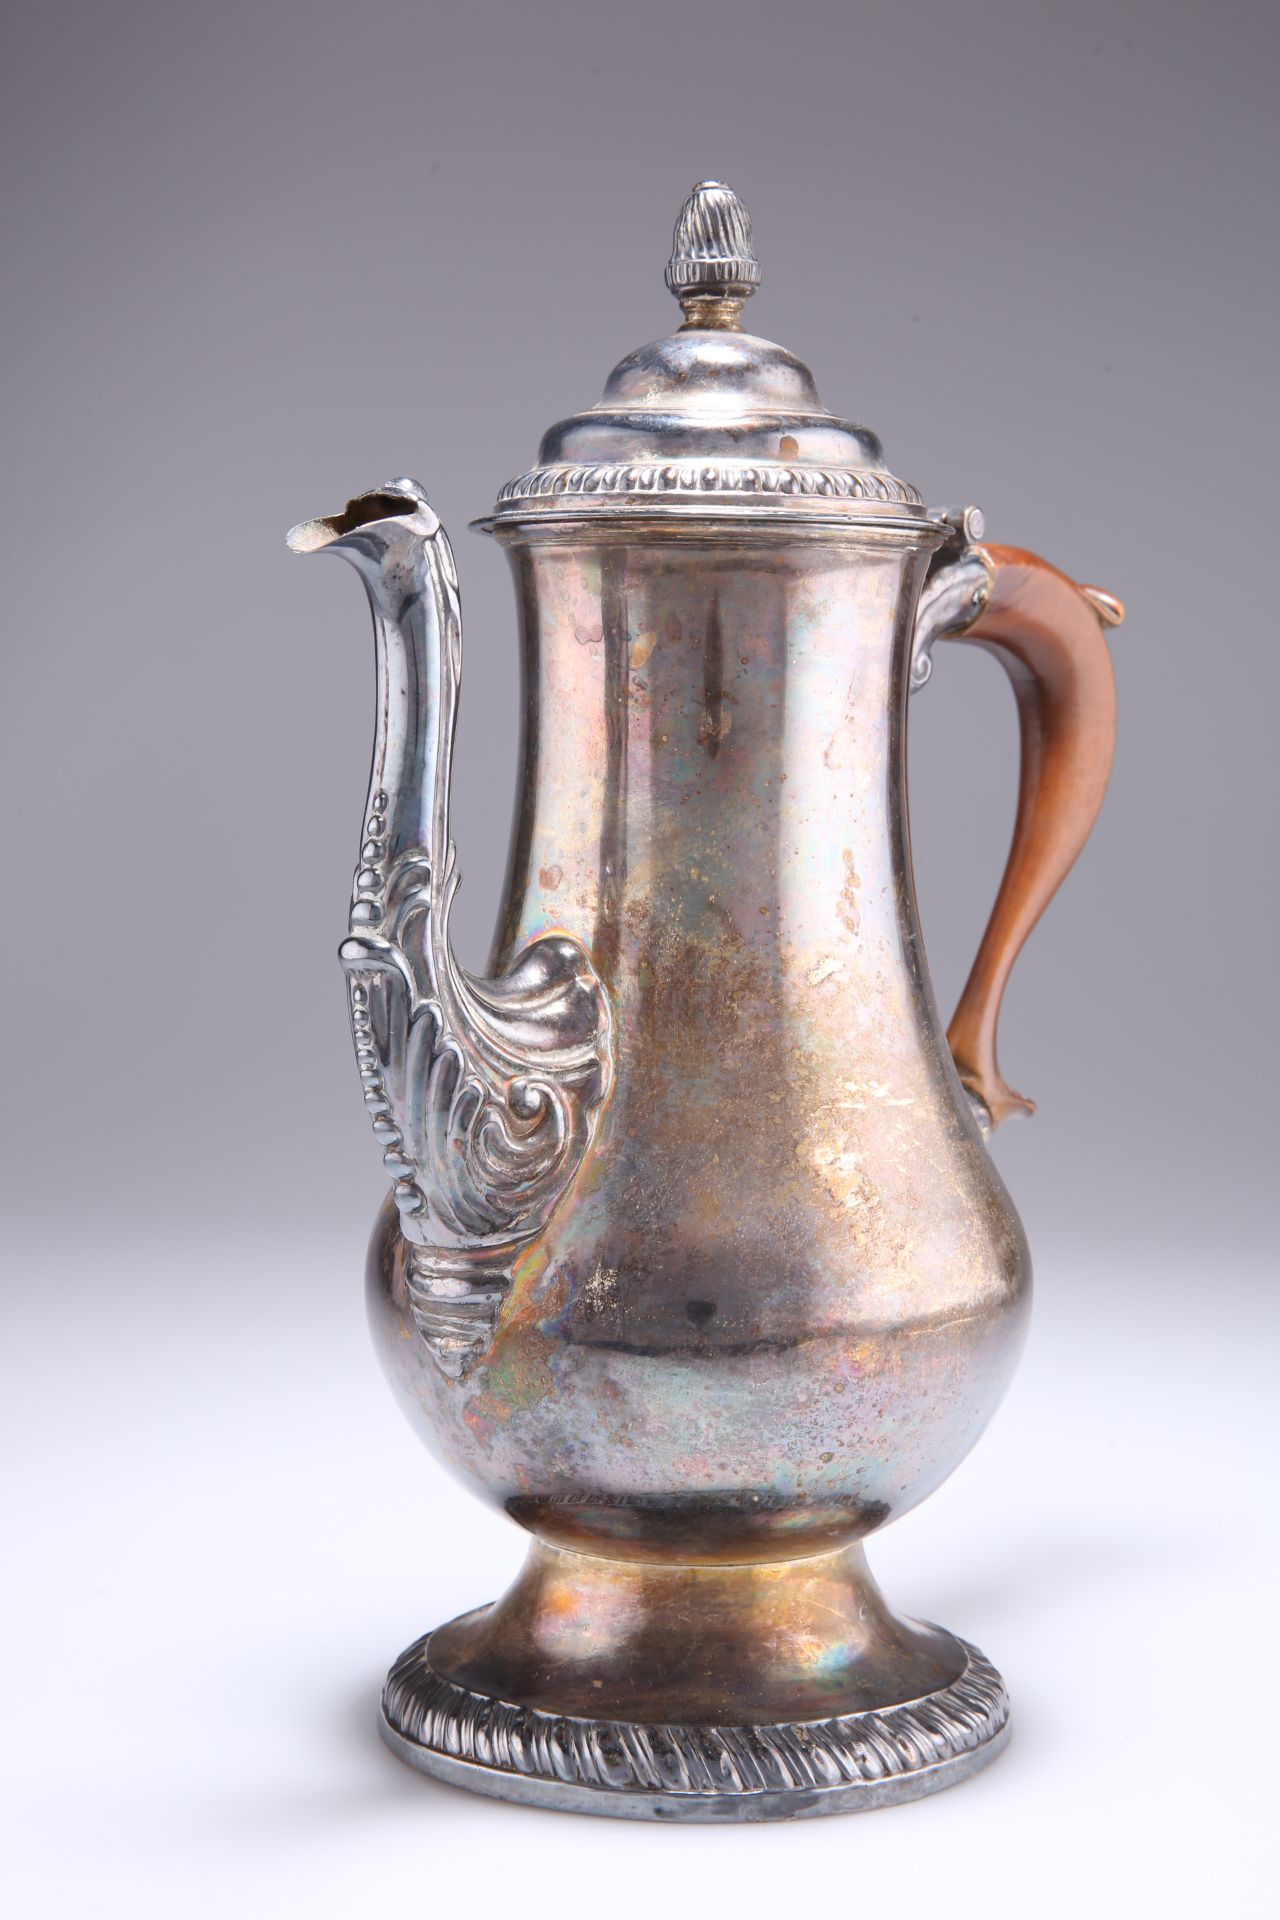 AN OLD SHEFFIELD PLATE COFFEE POT, CIRCA 1770 - Image 2 of 2